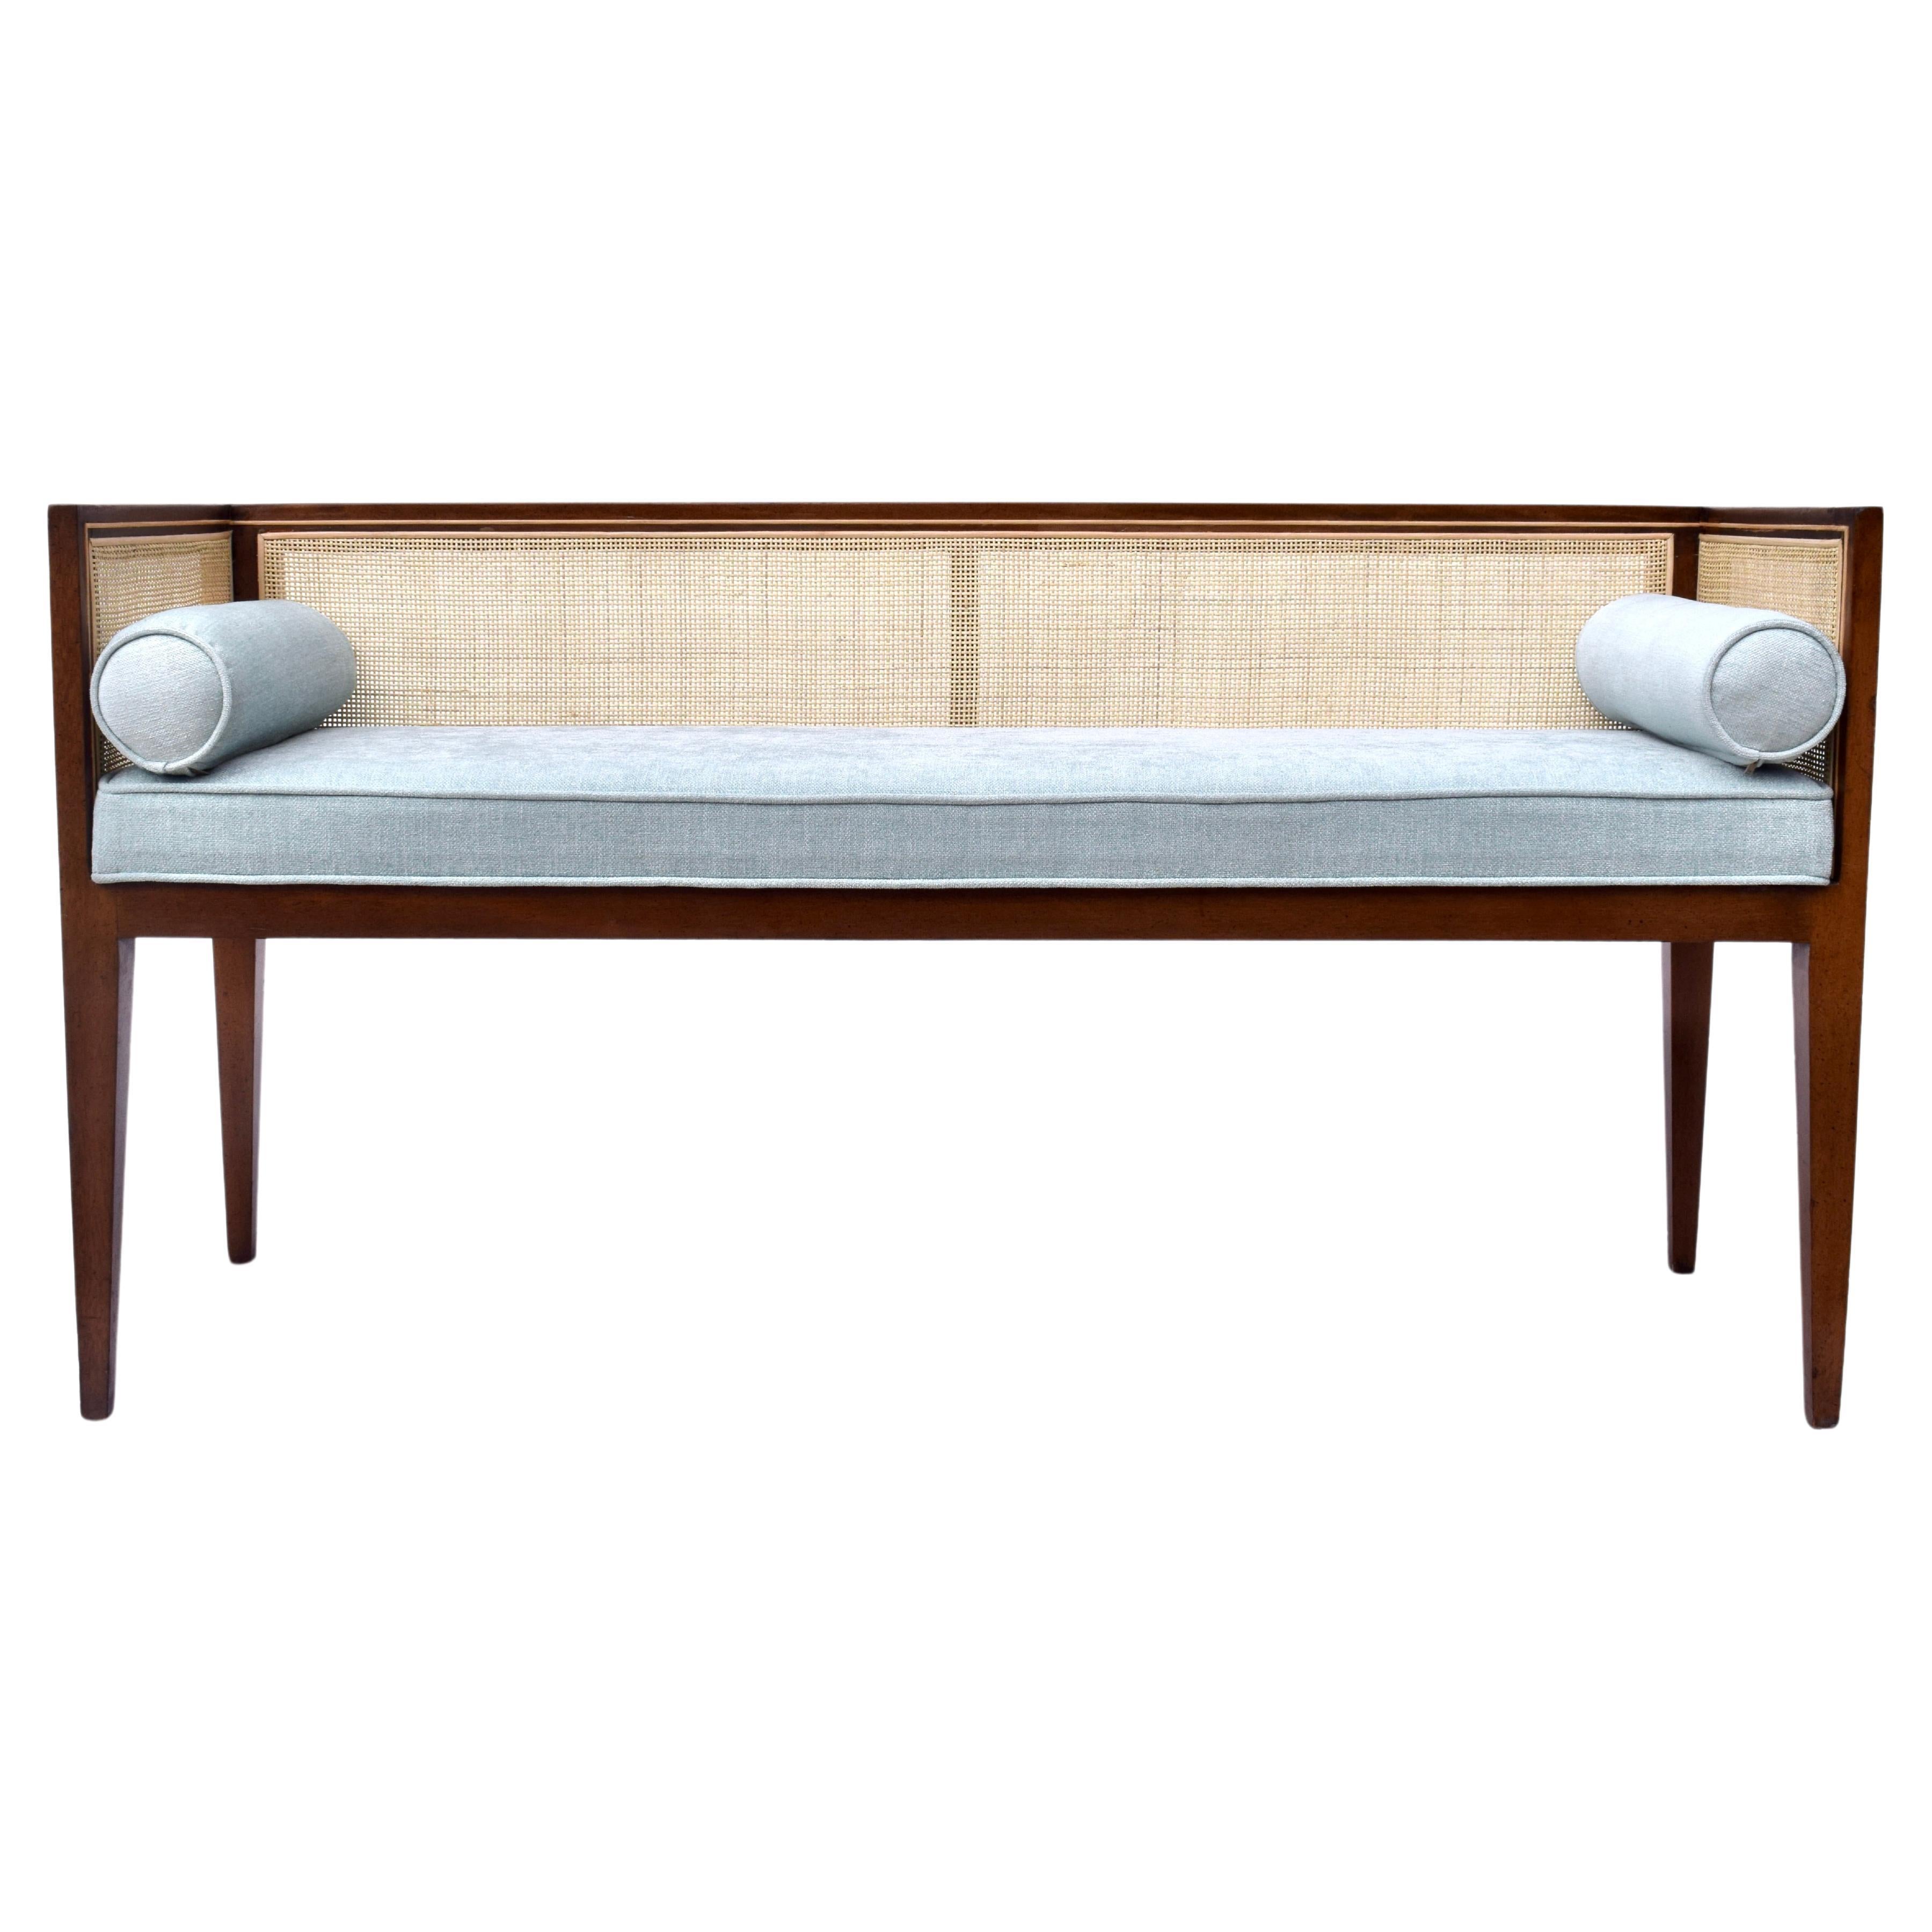 1950s Walnut Window Bench Attributed to Edward Wormley for Dunbar For Sale